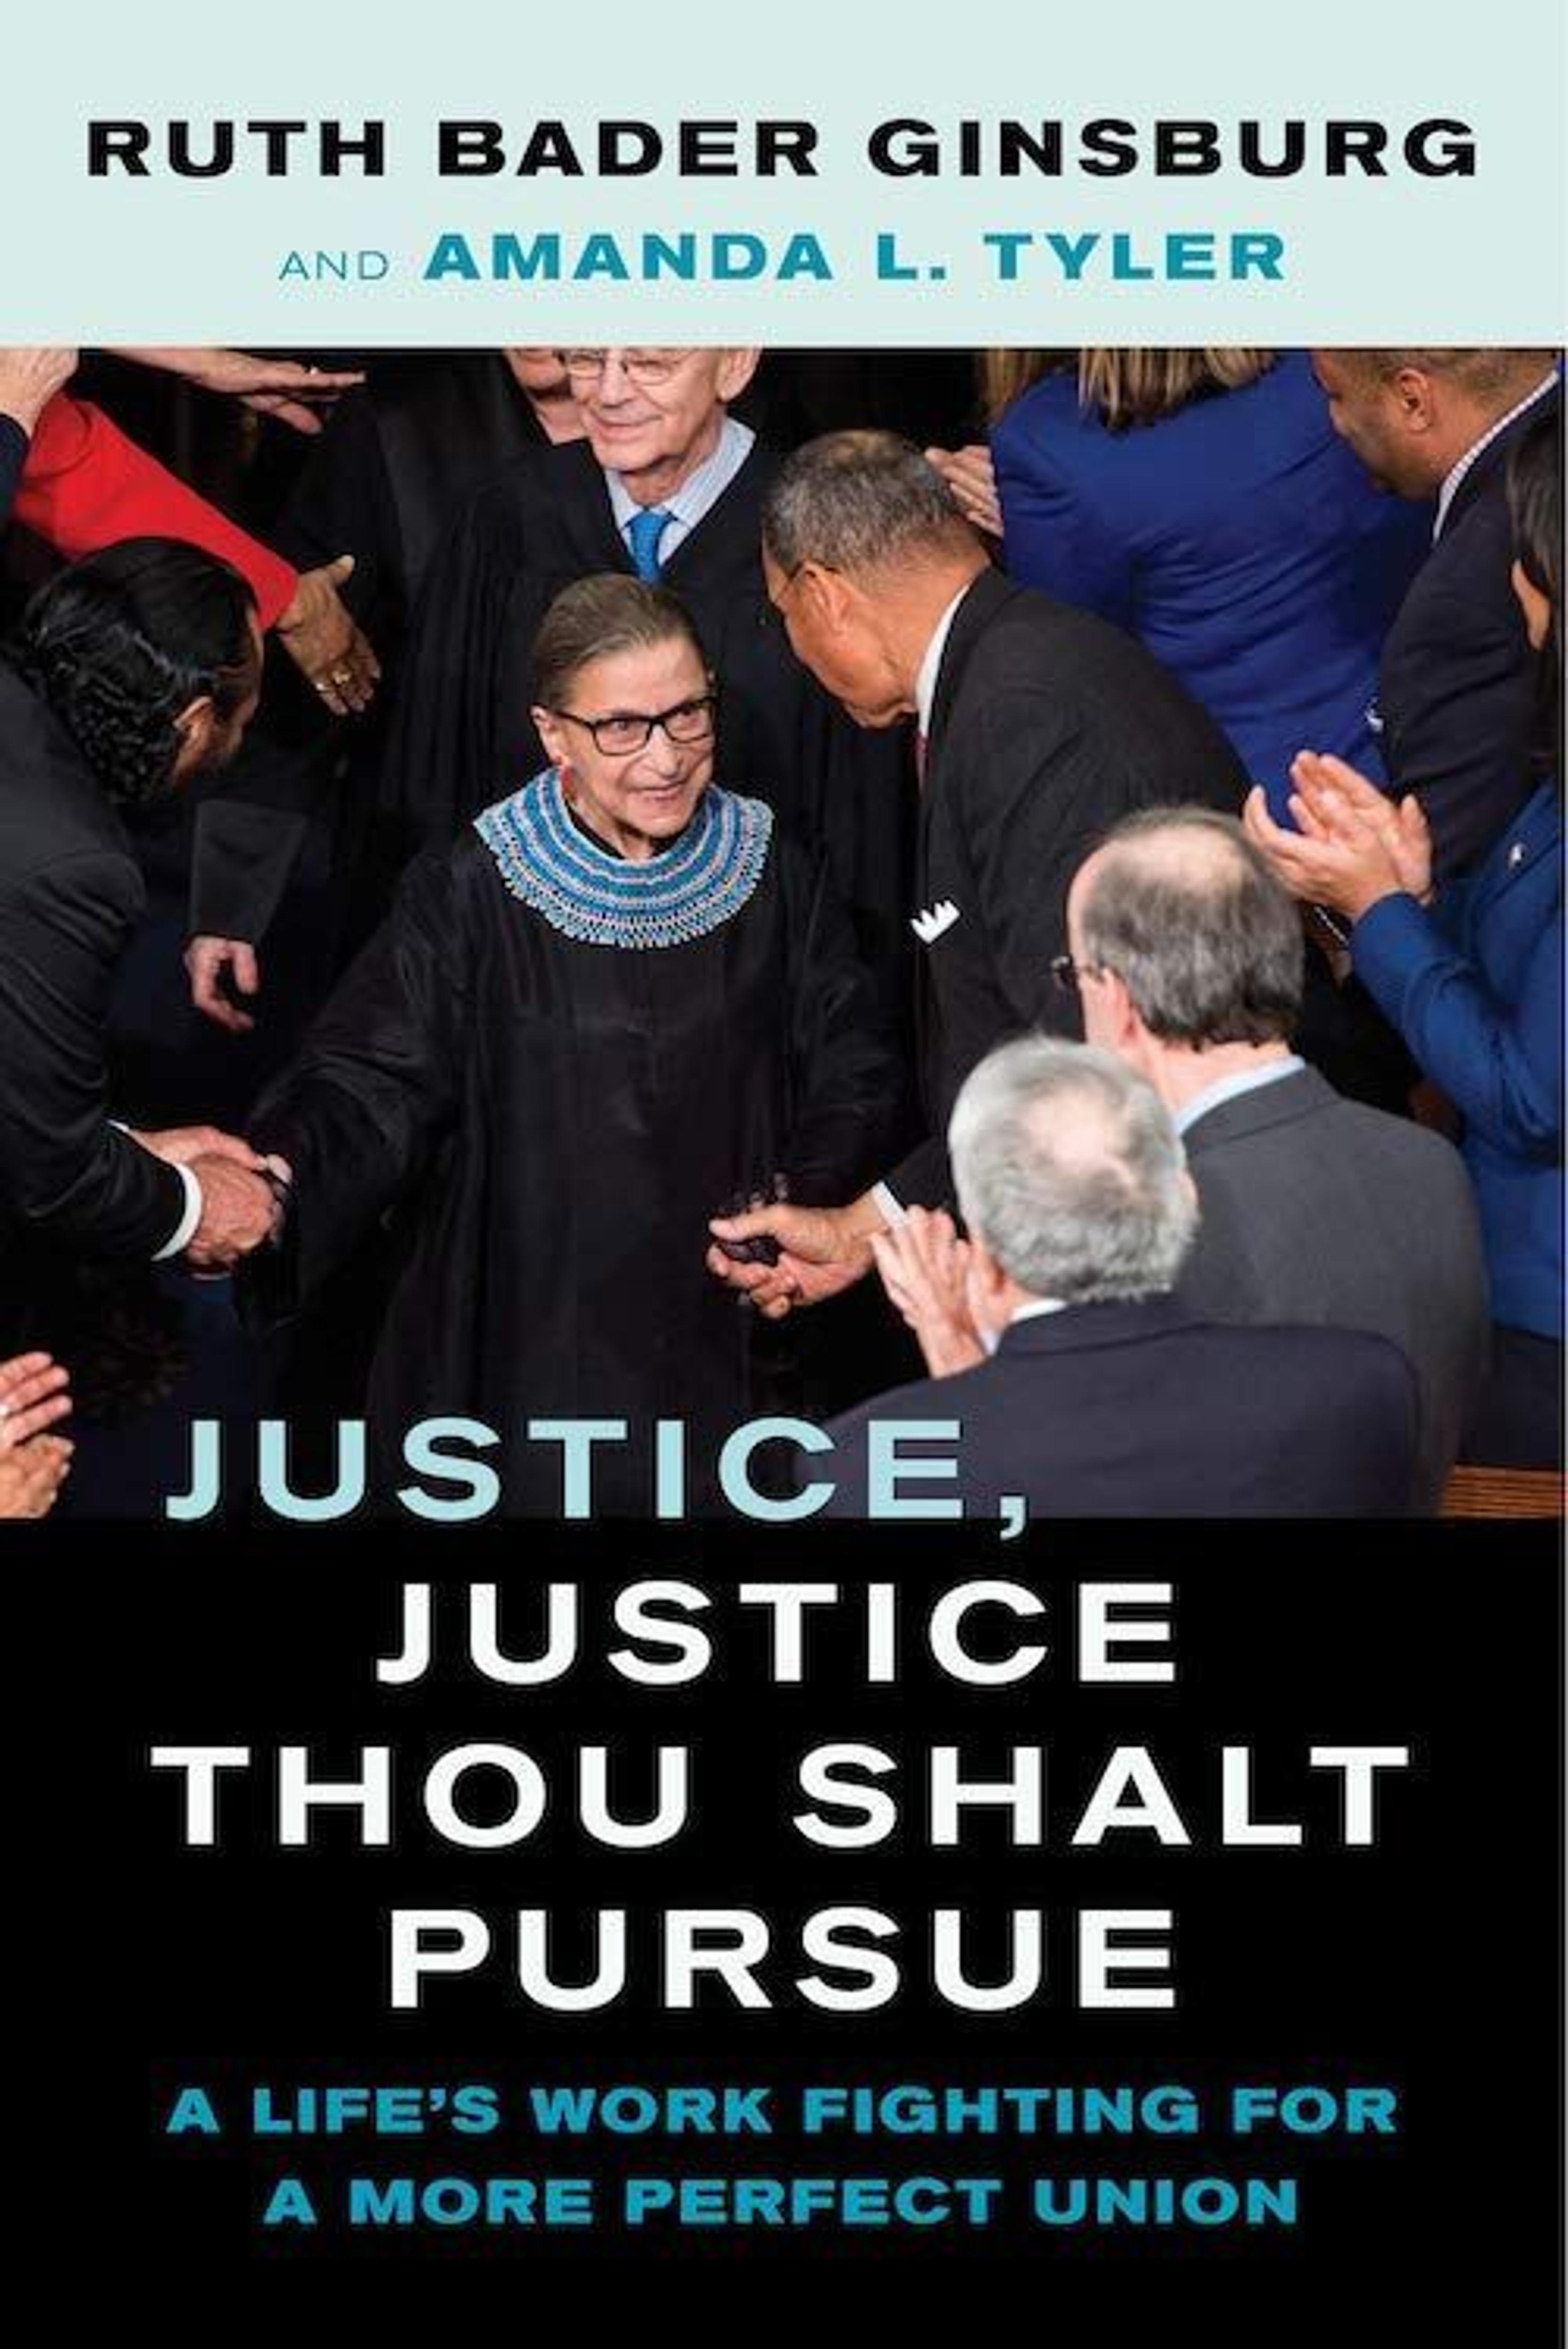 The Notorious RBG Is Gone, But Her Fight Continues